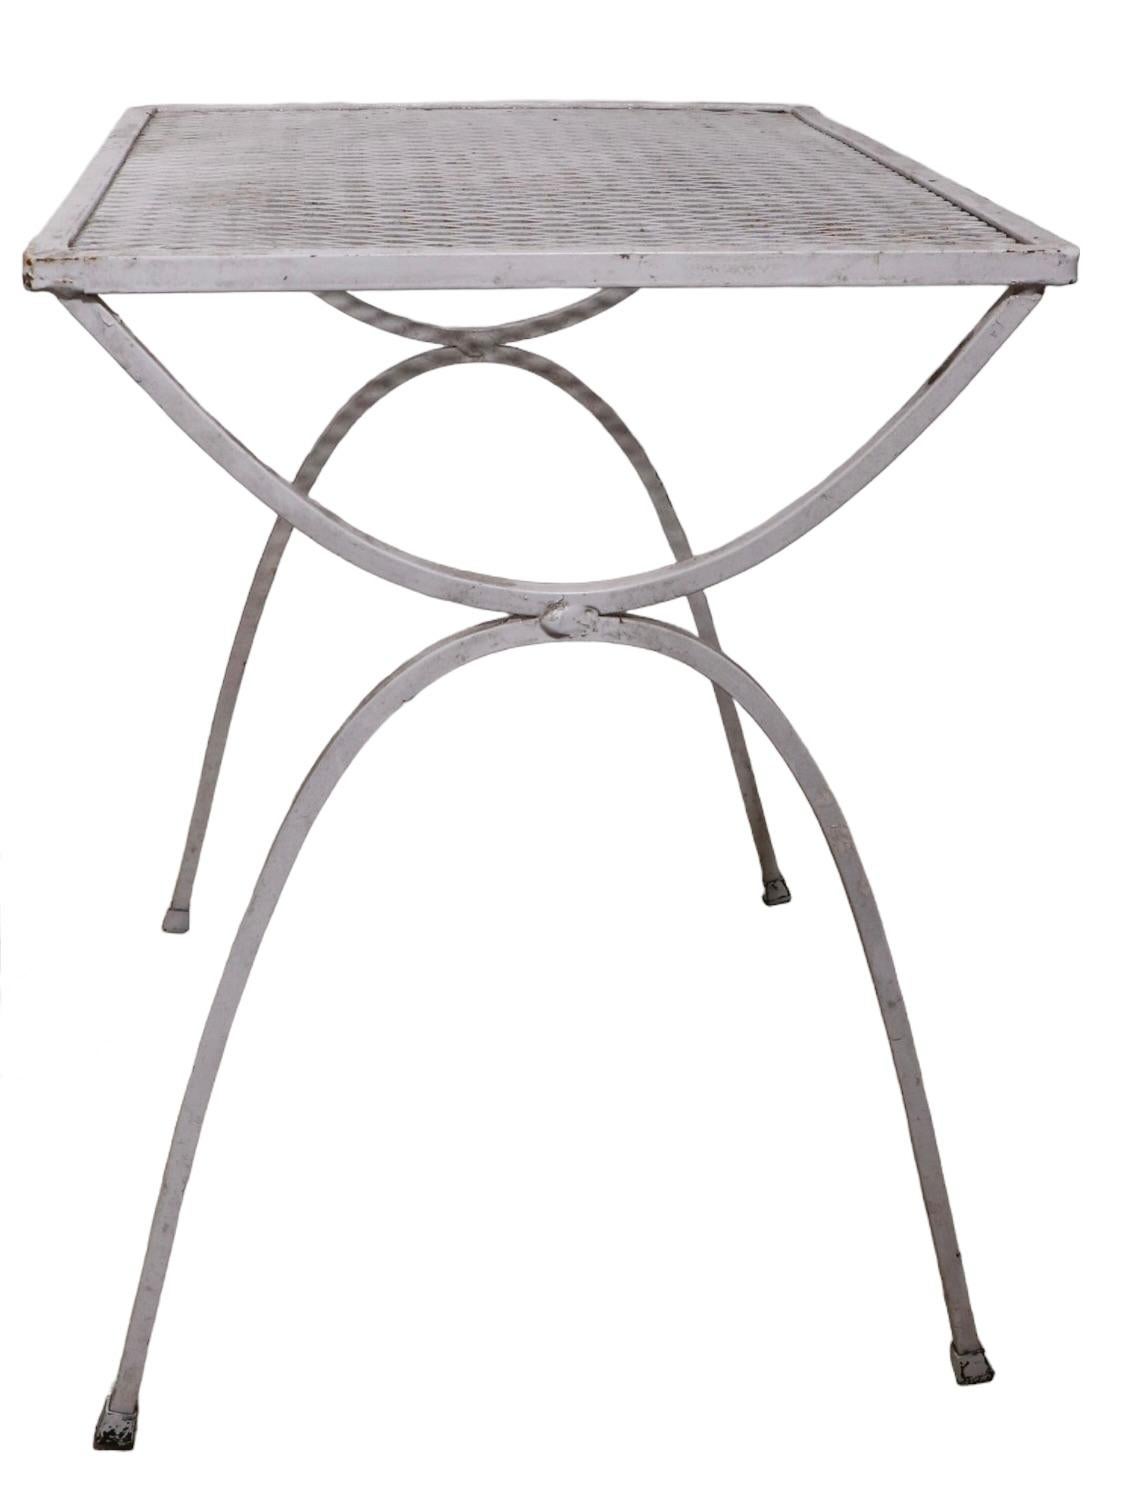 Wrought Iron Two Piece Garden Patio Poolside Nesting Tables by Salterini 2 Sets Available For Sale